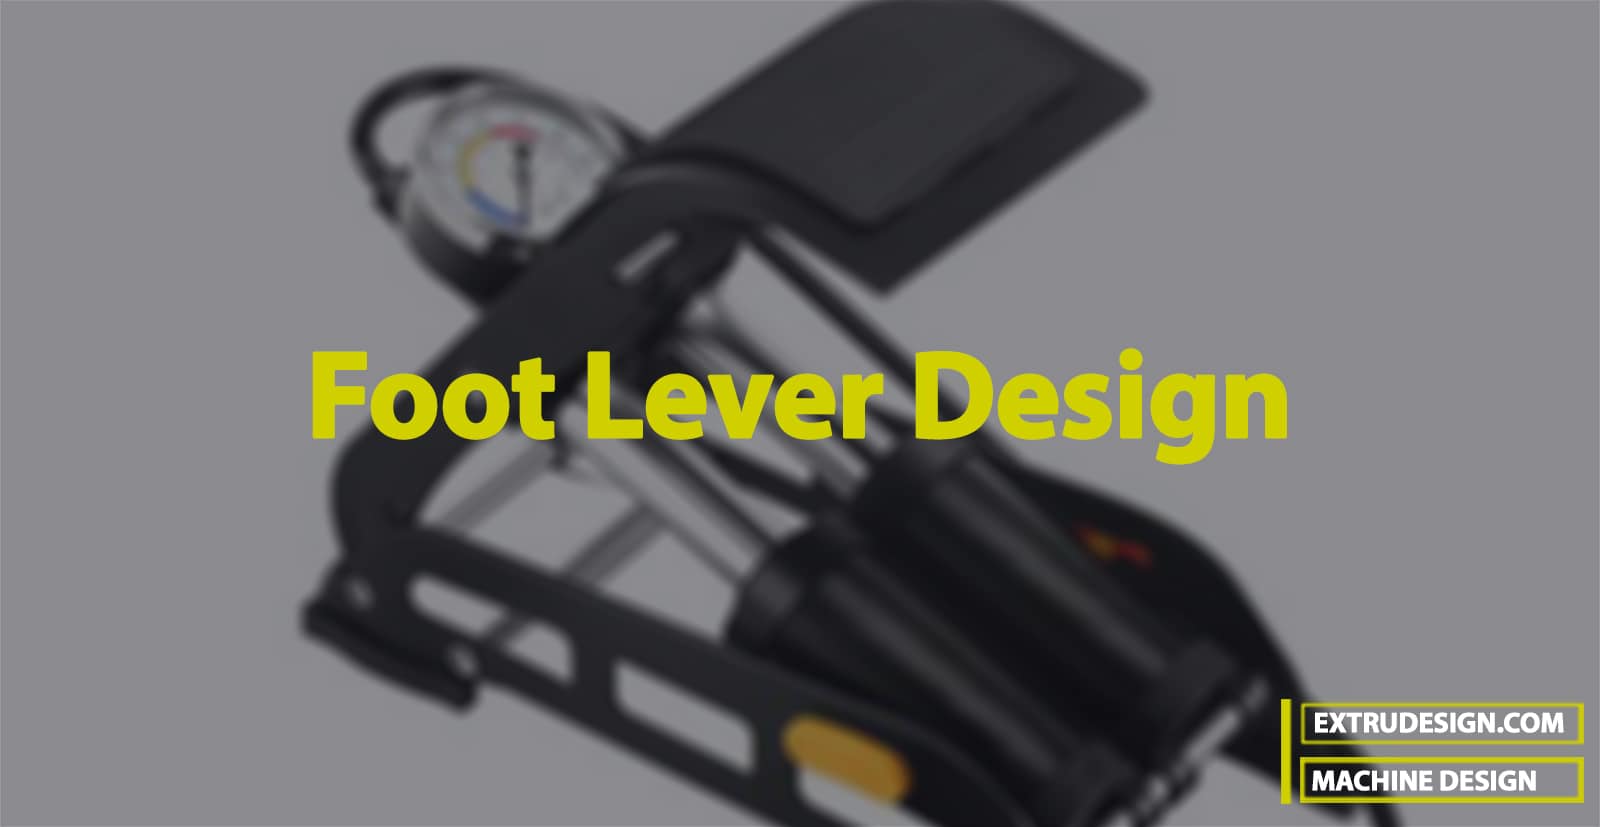 How to design Foot Lever? | Foot Pump Lever